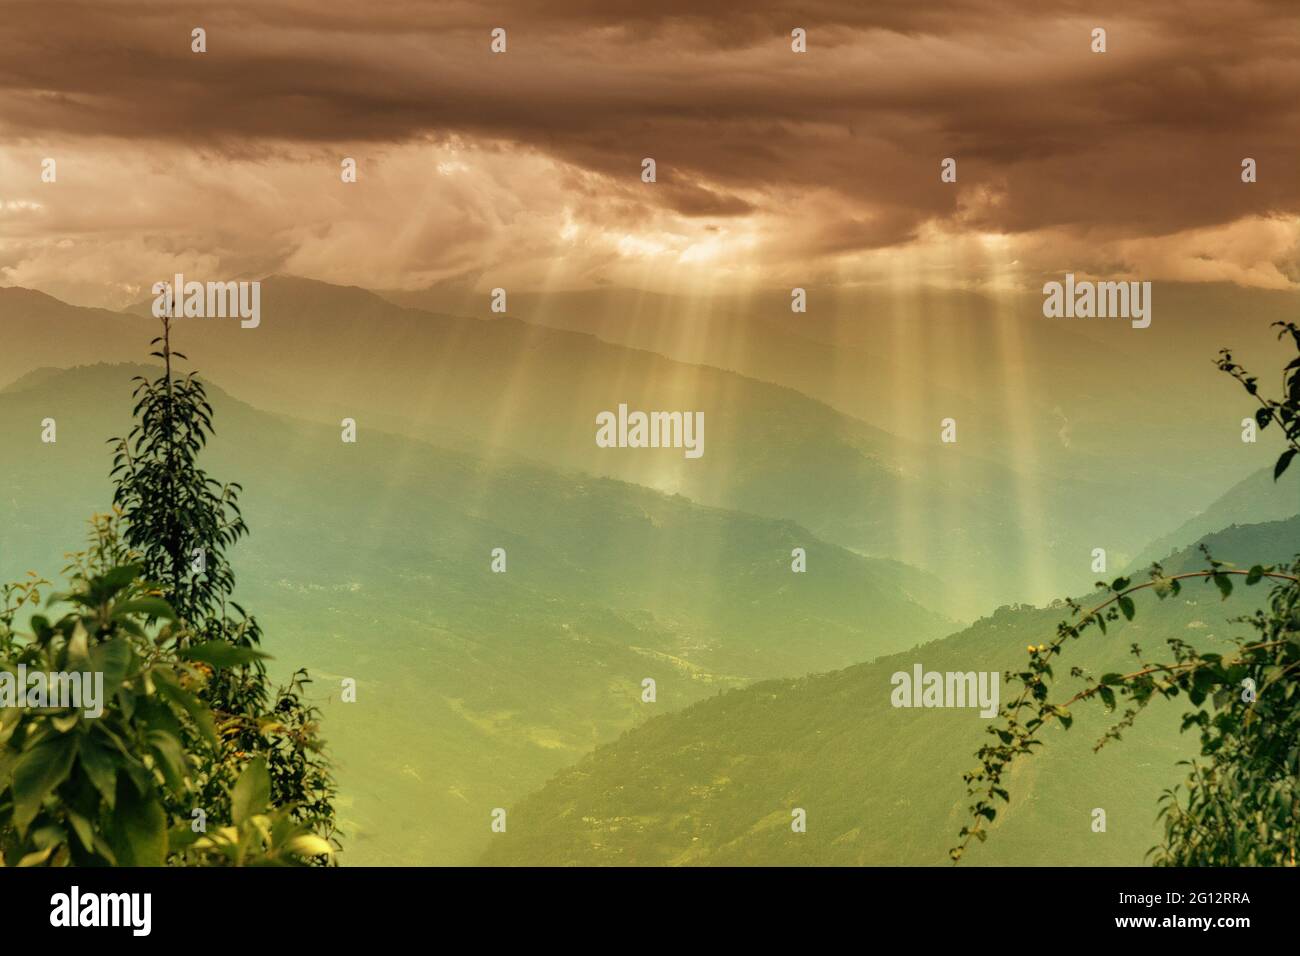 Sun rays coming out of cloud burst - at Rabangla, Sikkim, India. Trees in foreground and Himalayan mountains in background. Stock Photo